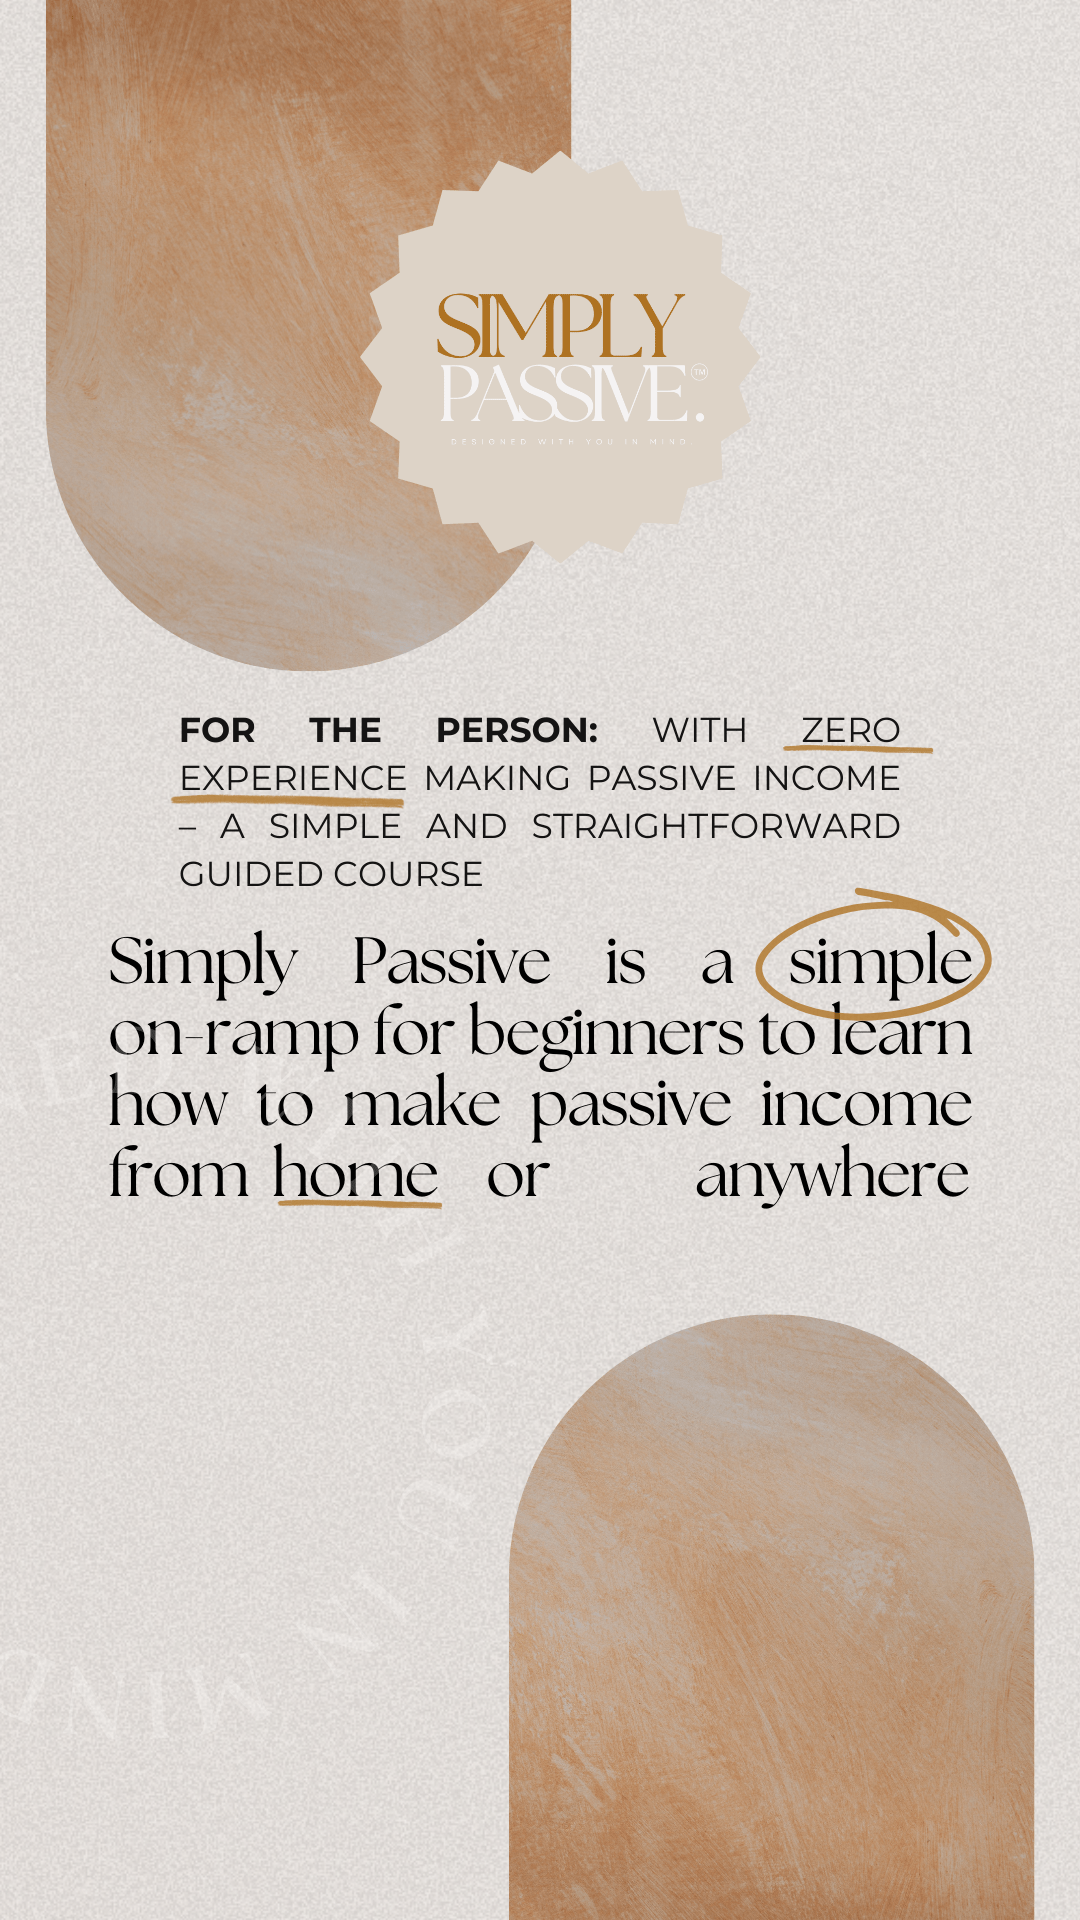 SIMPLY PASSIVE - The Wealthy Hut